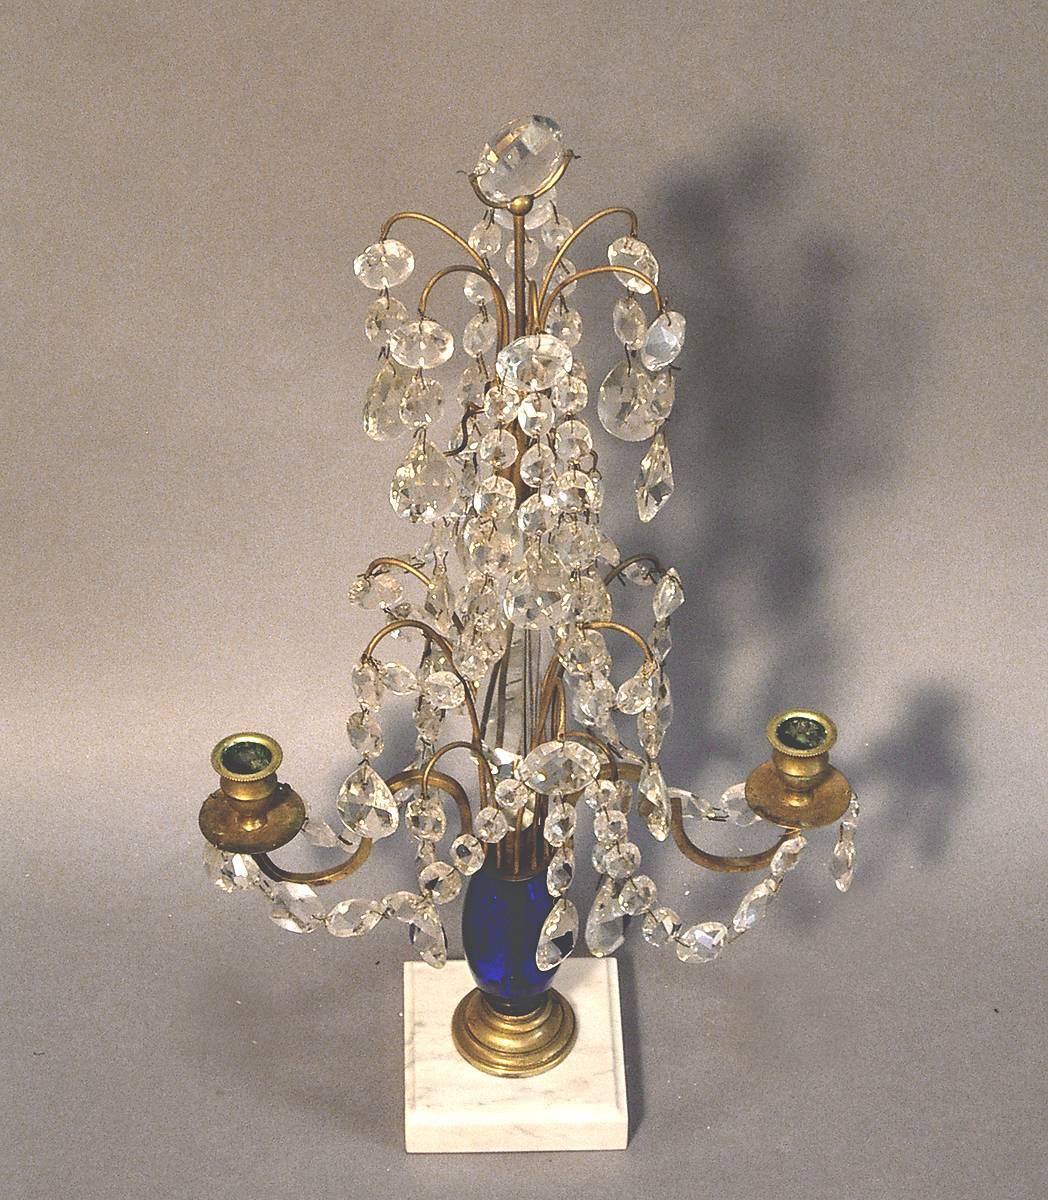 Pair of Danish crystal candelabra or girandoles, circa 1900, on marble bases with brass fittings. Beautiful cobalt glass stems.